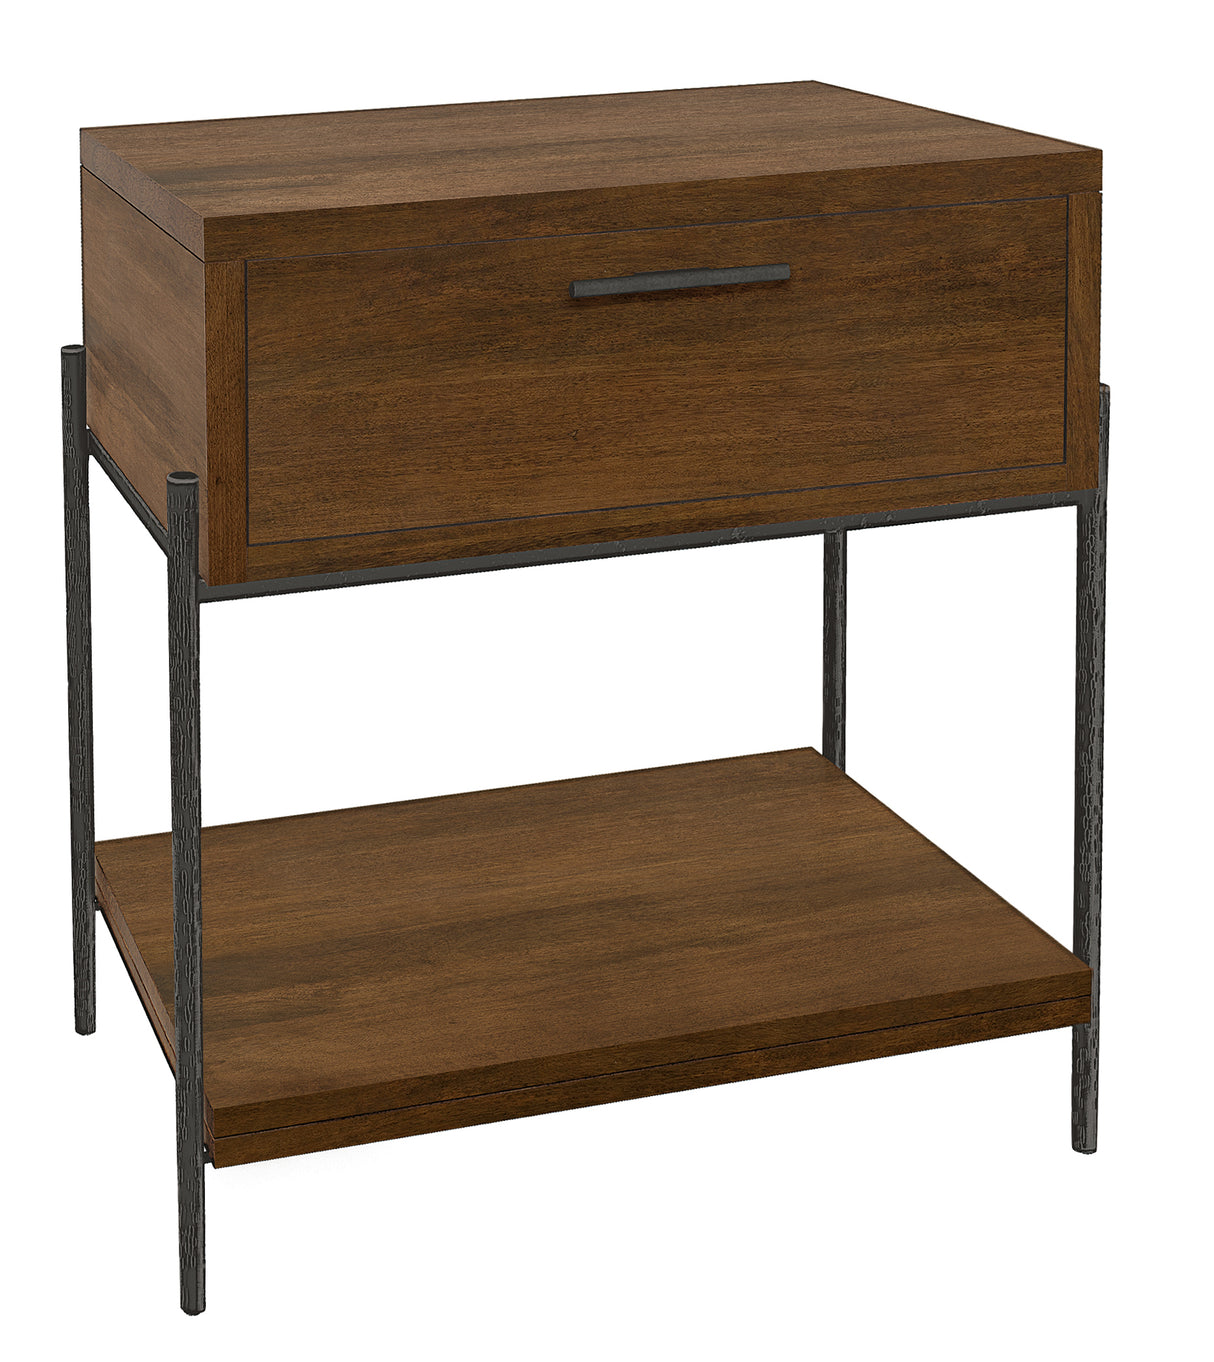 Hekman 26064 Bedford Park 30.5in. x 19in. x 28.5in. Single Drawer Night Stand